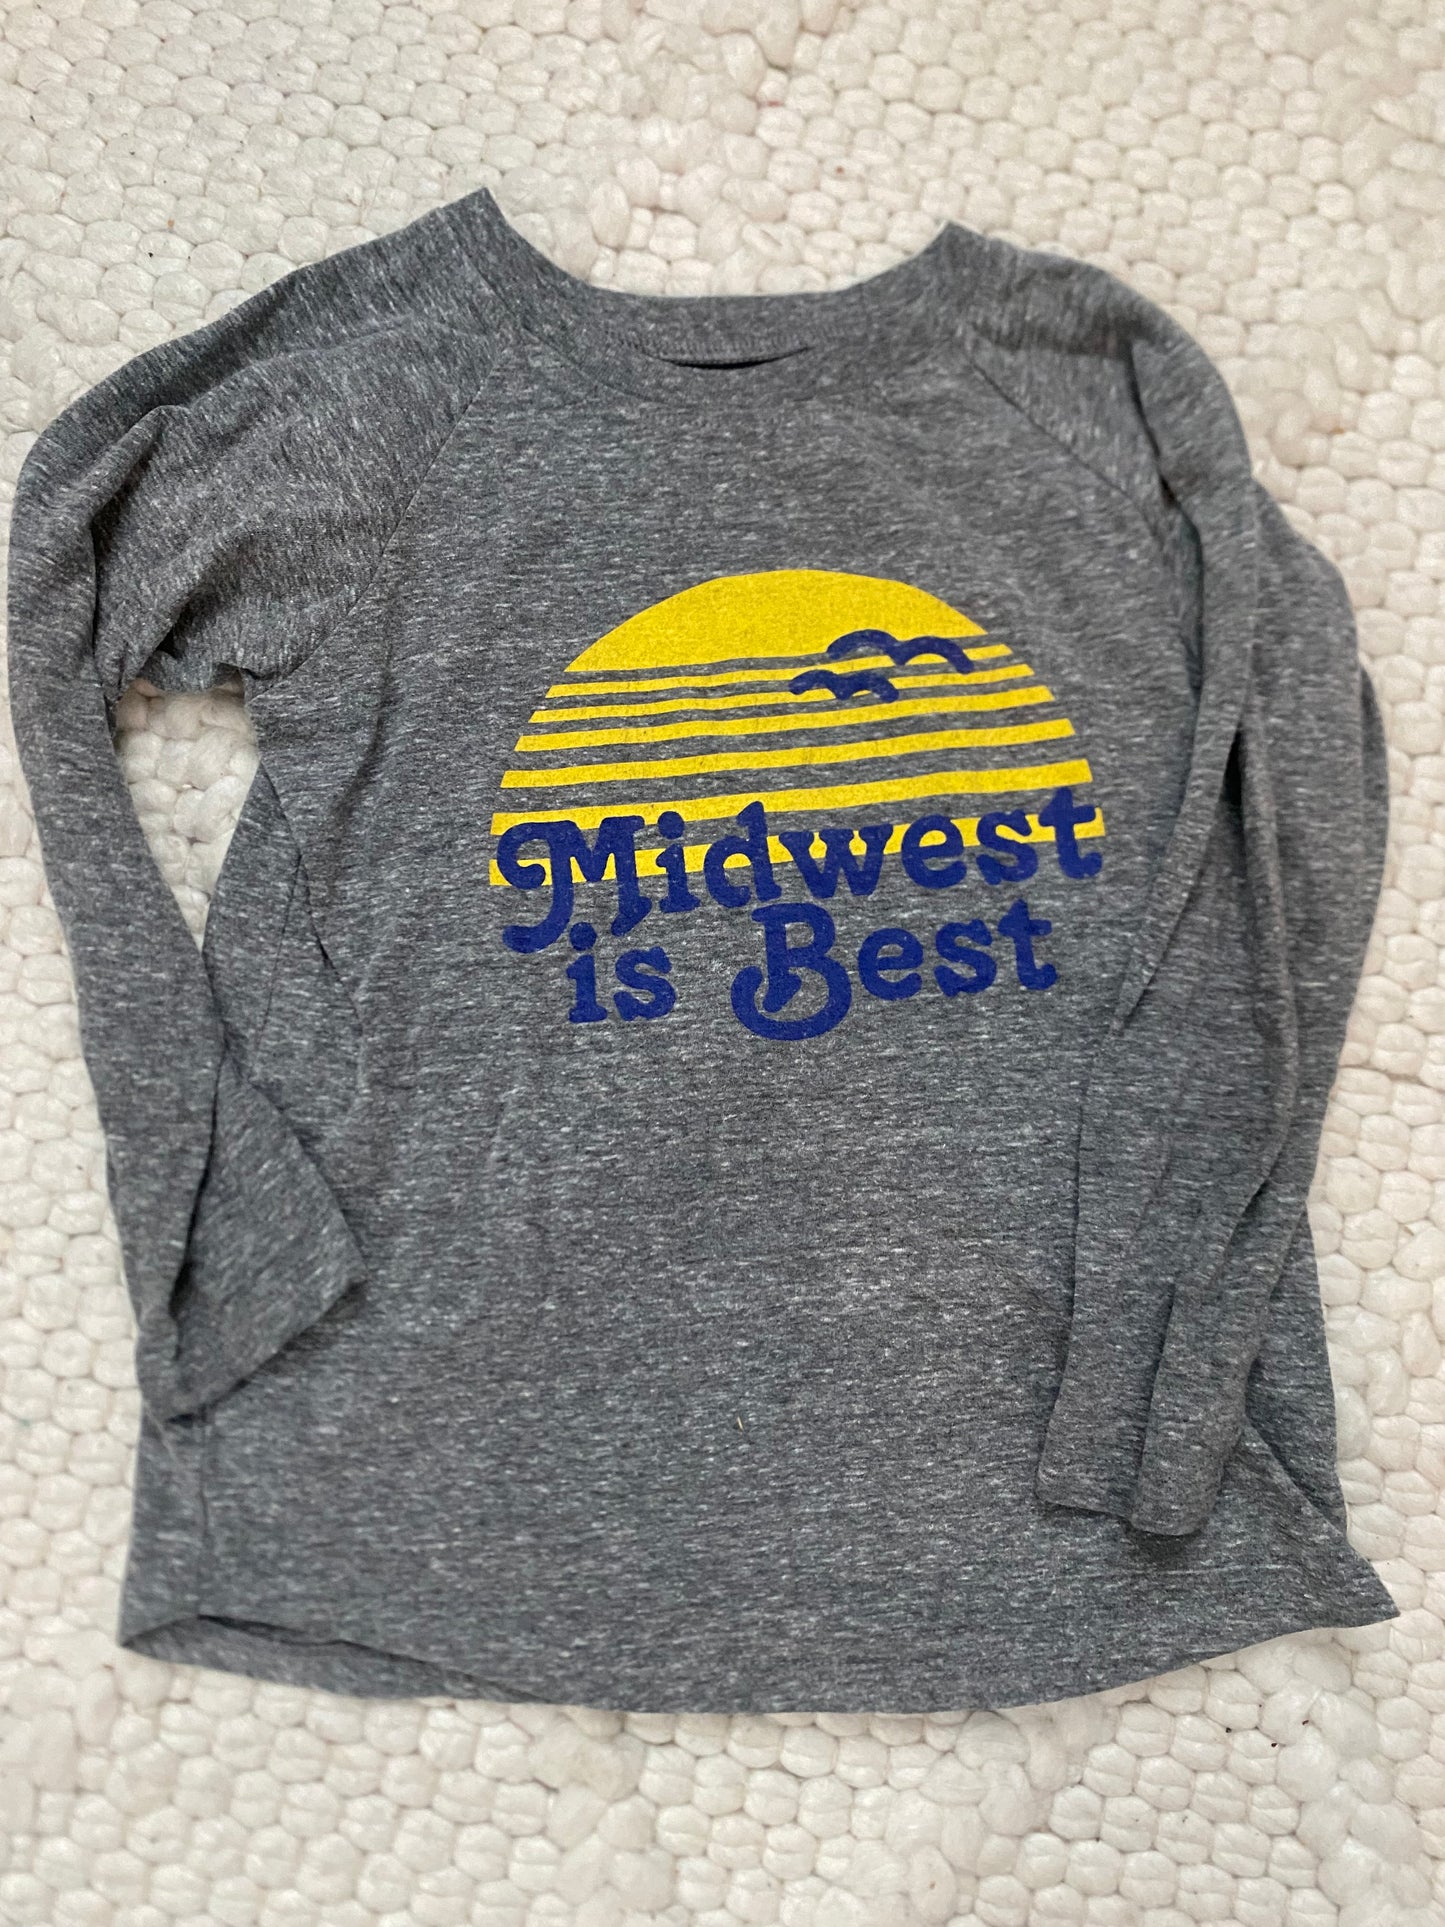 Midwest is Best long sleeve size 7